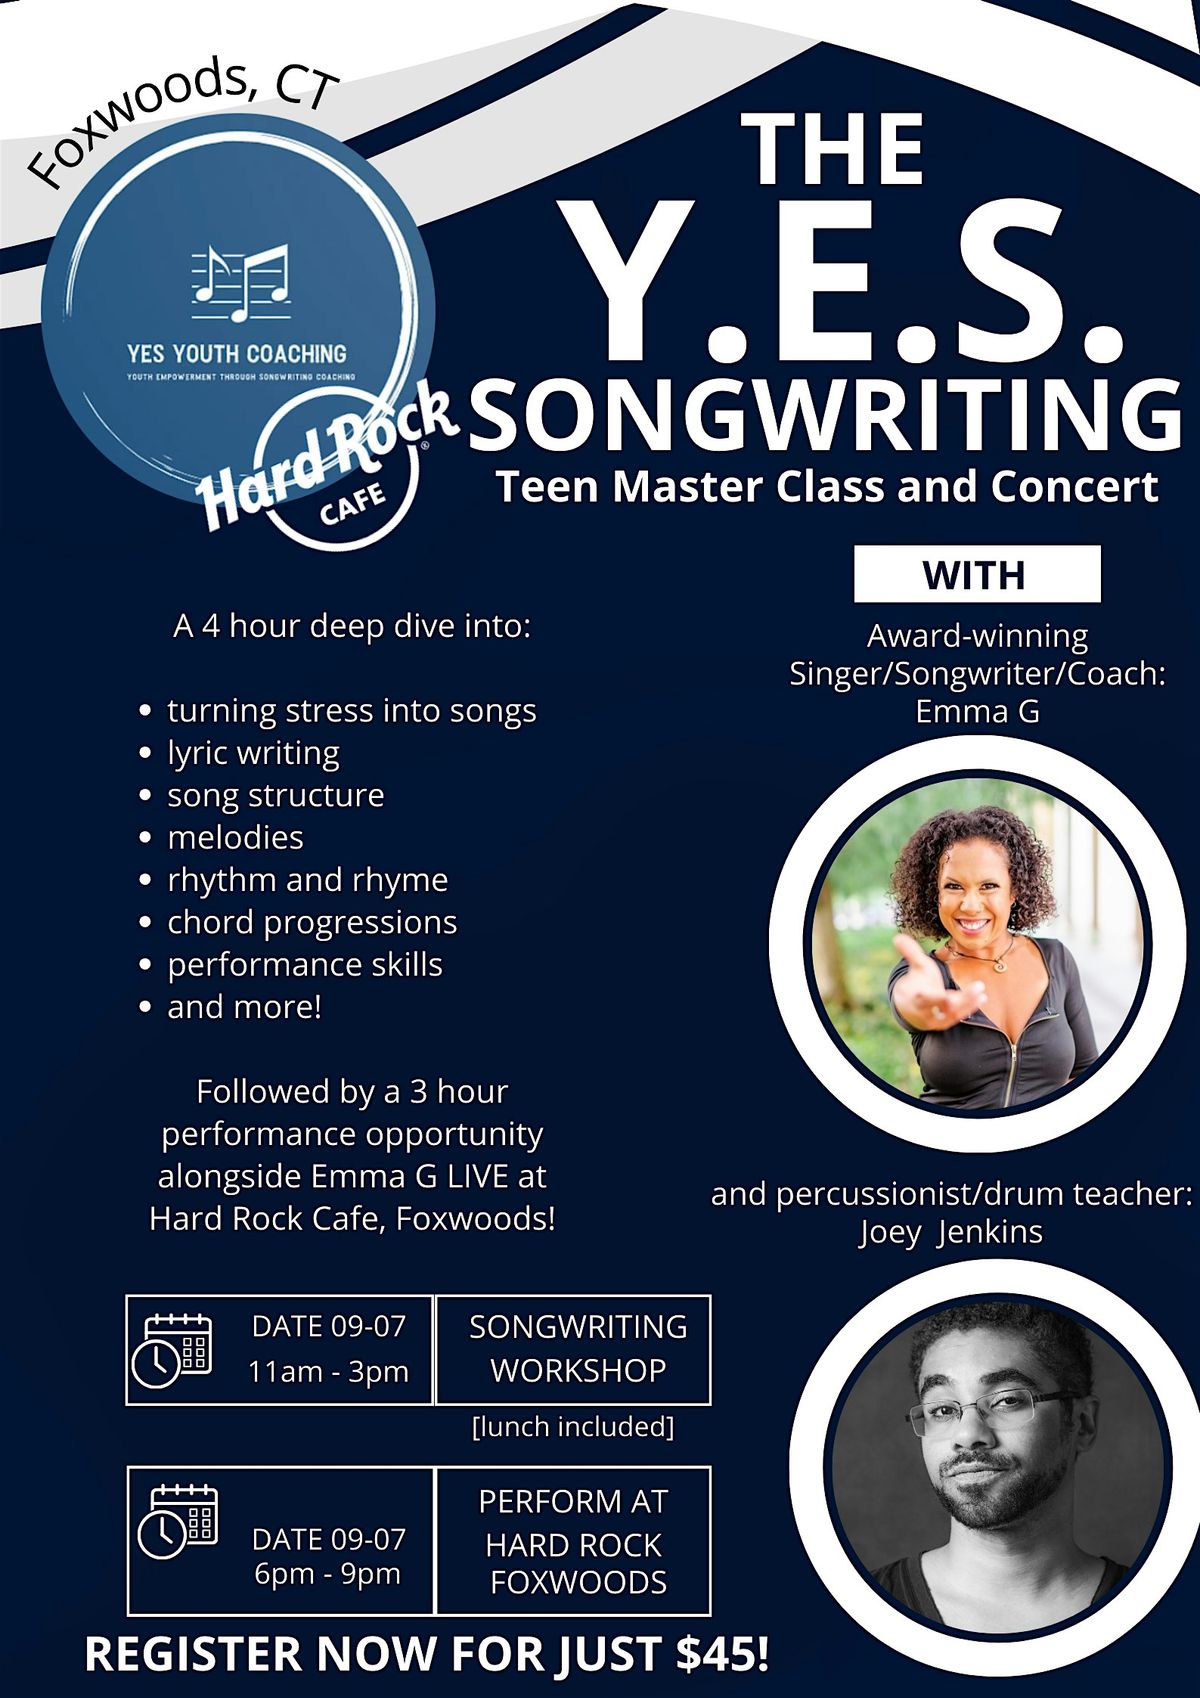 YES! Foxwoods: Youth Empowerment through Songwriting Workshop + Show